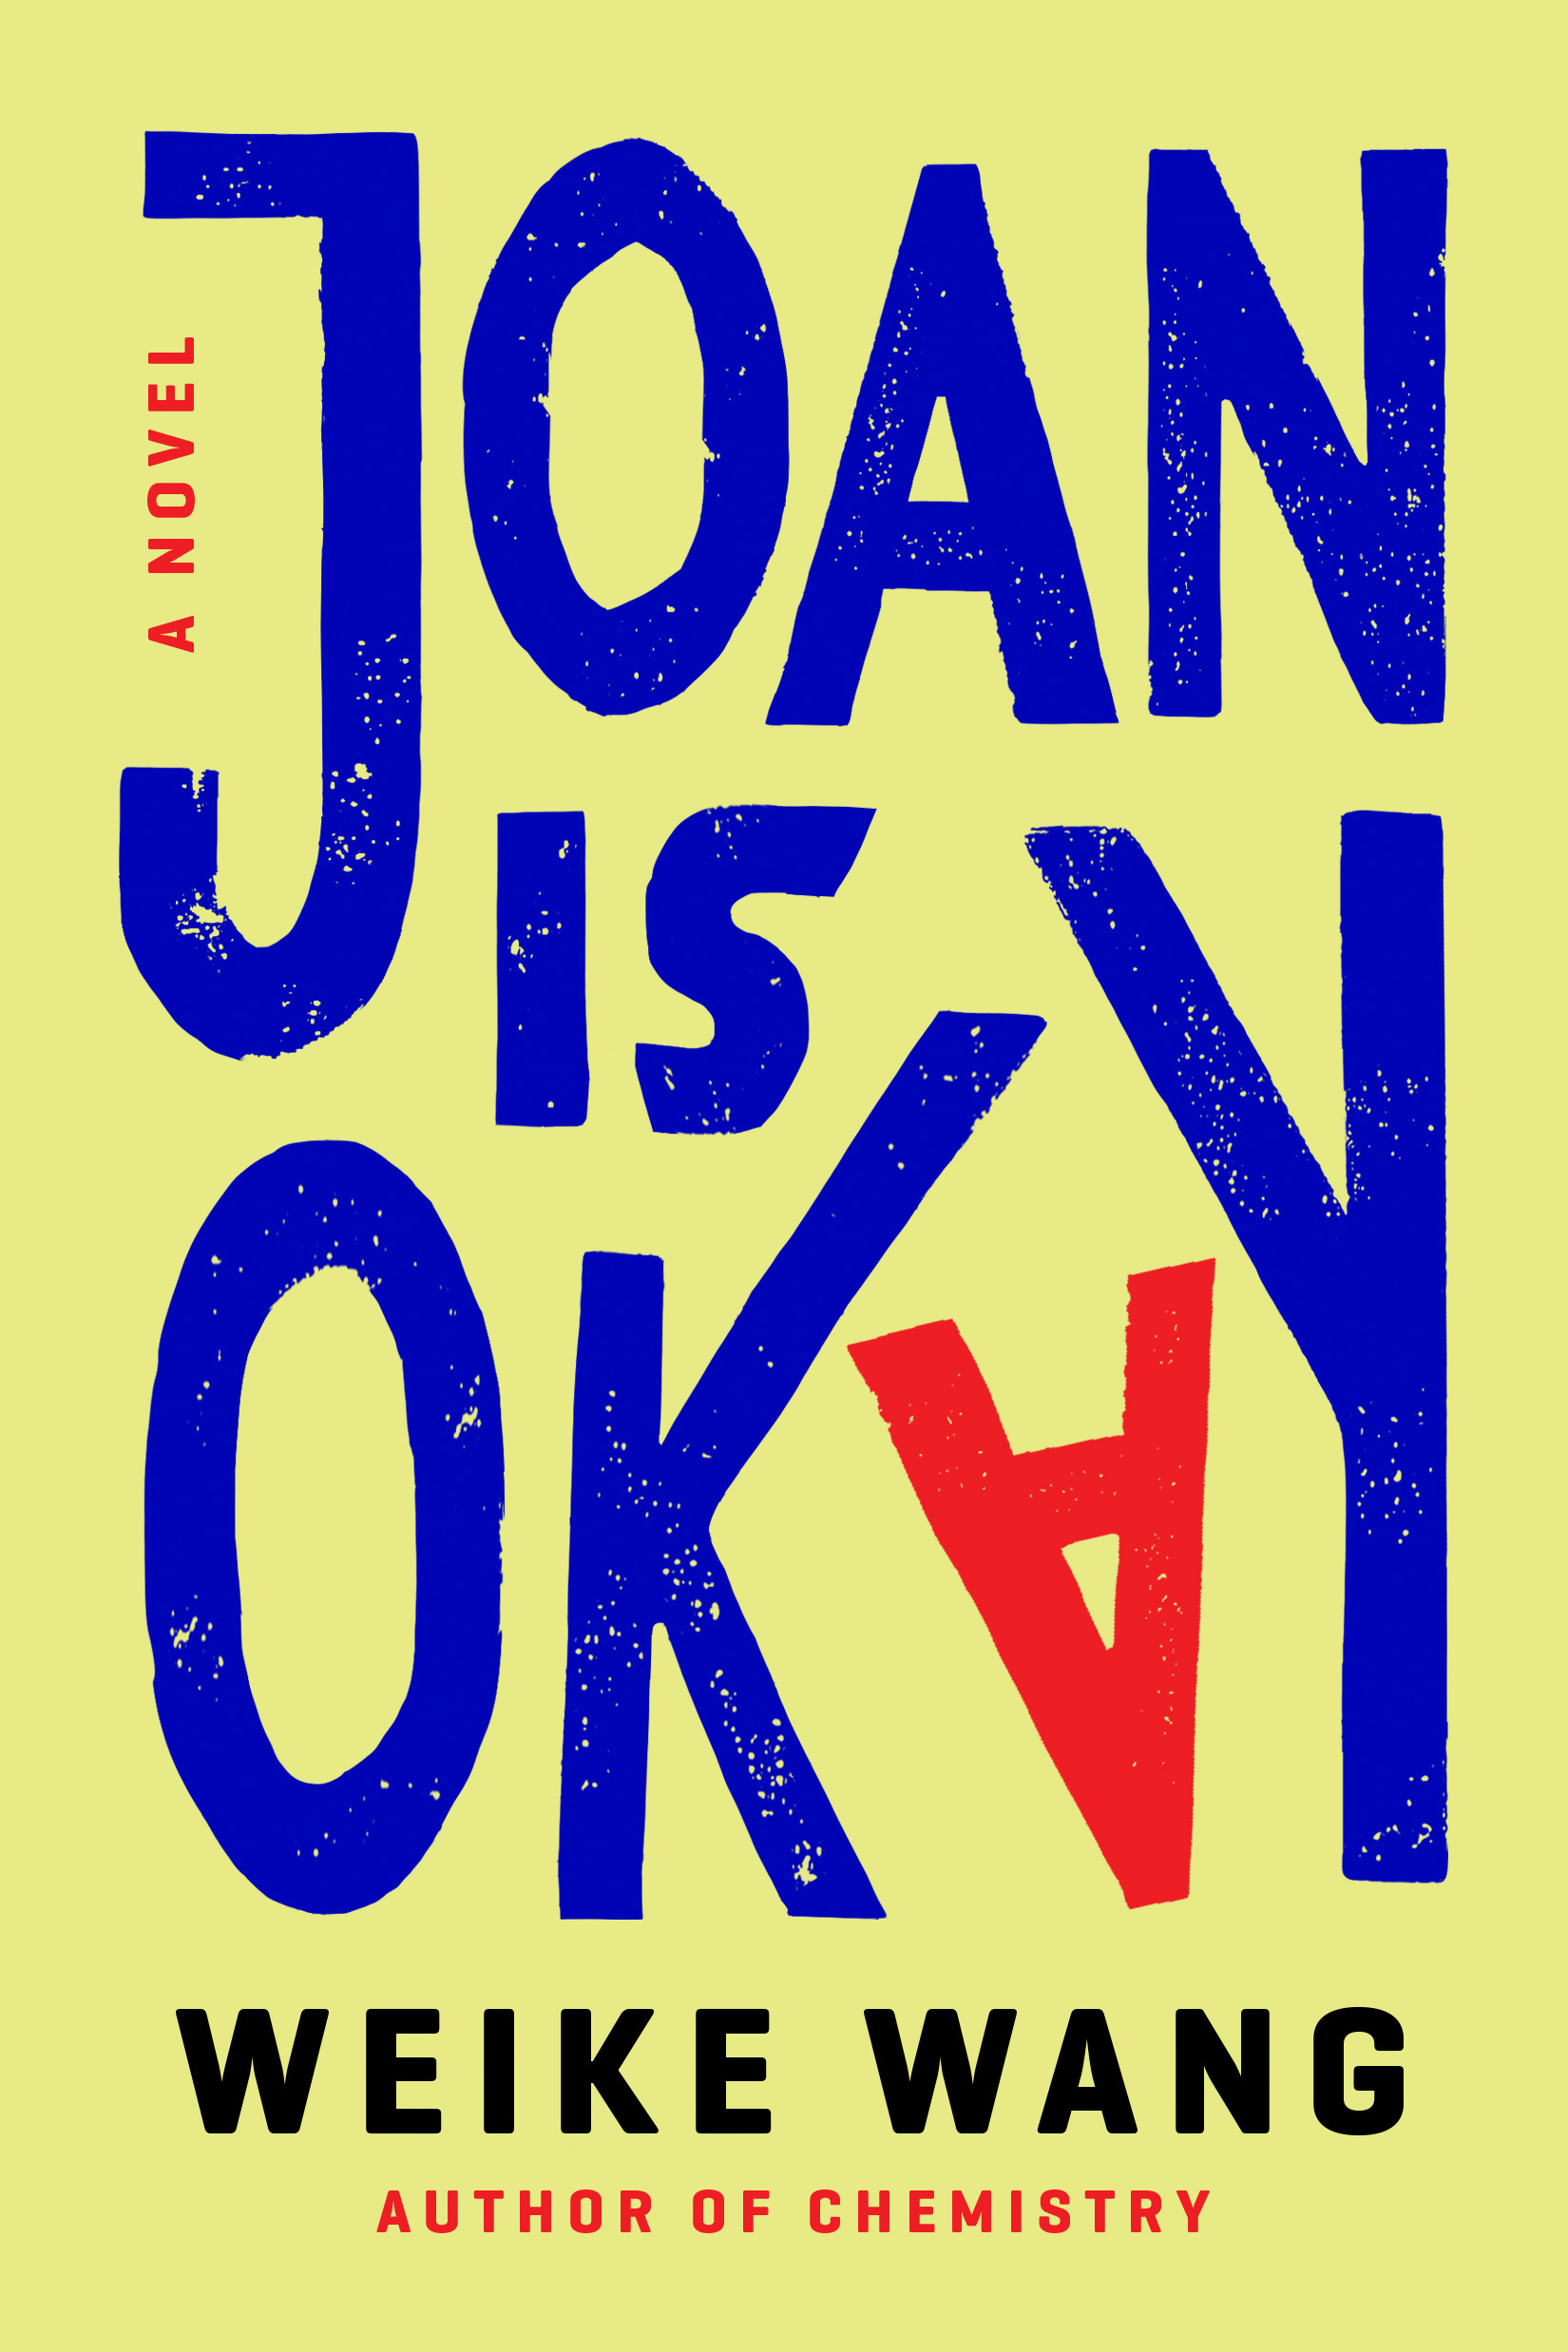 Joan is Okay cover art. Big blue text reading "Jane is Okay" over a yellow background. The "A" in "okay" is bright red and upside down